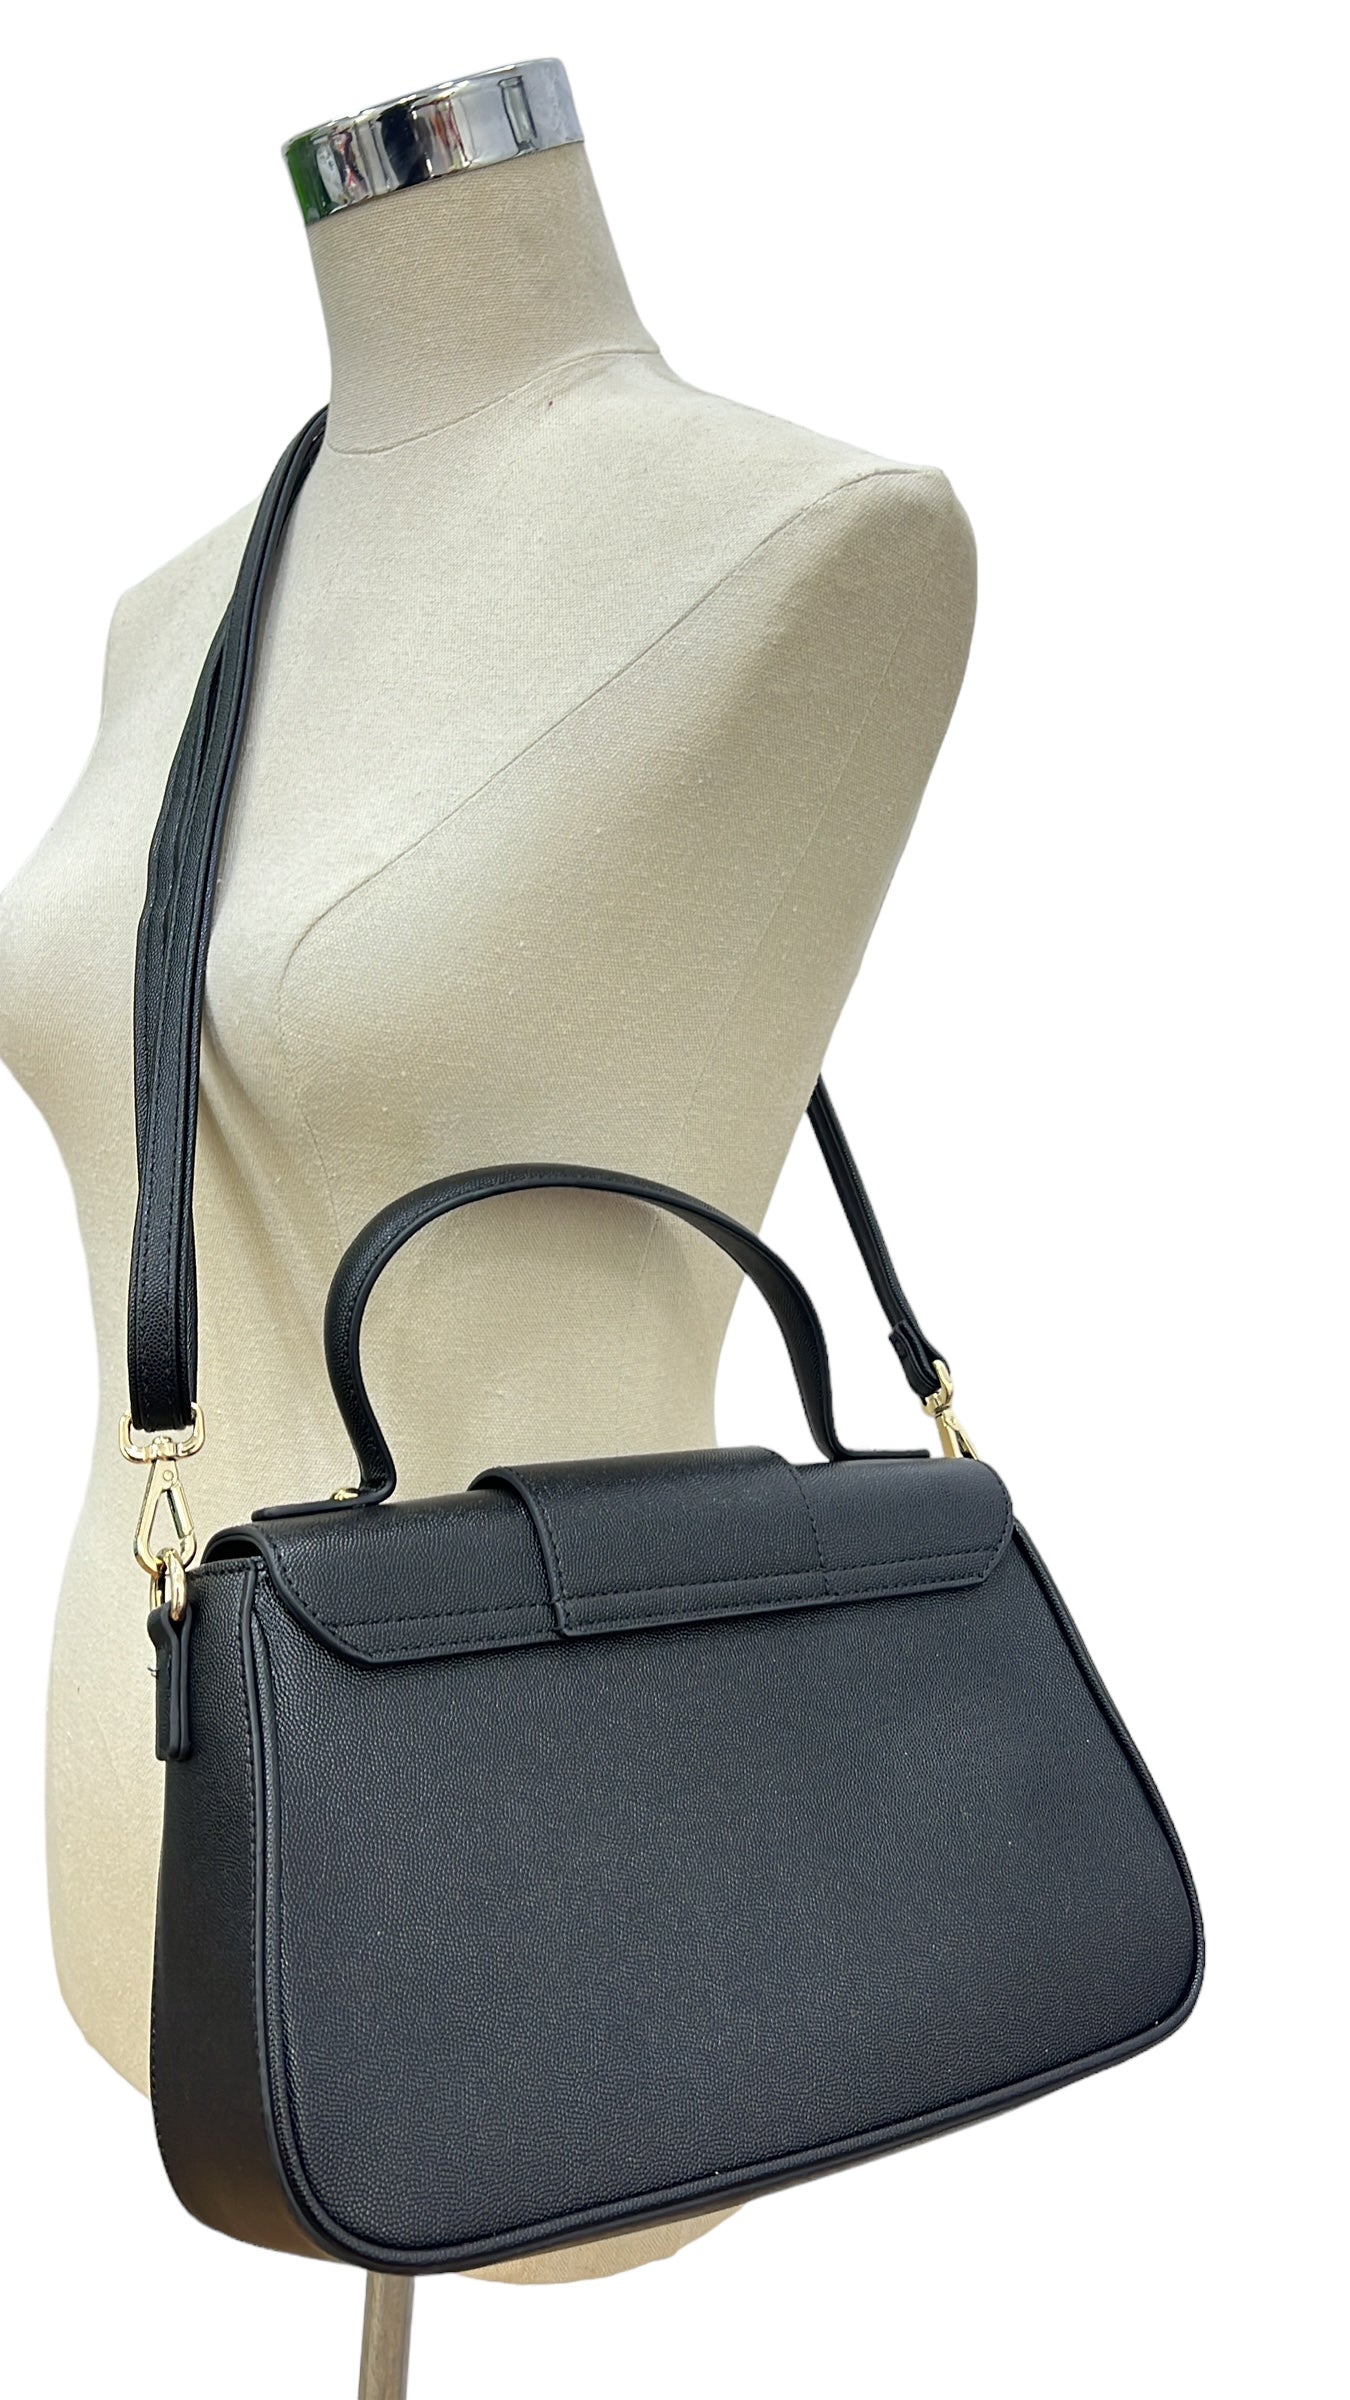 CHRISBELLA TEXTURED BUCKLE DETAIL TWO-TONE BAG IN BLACK